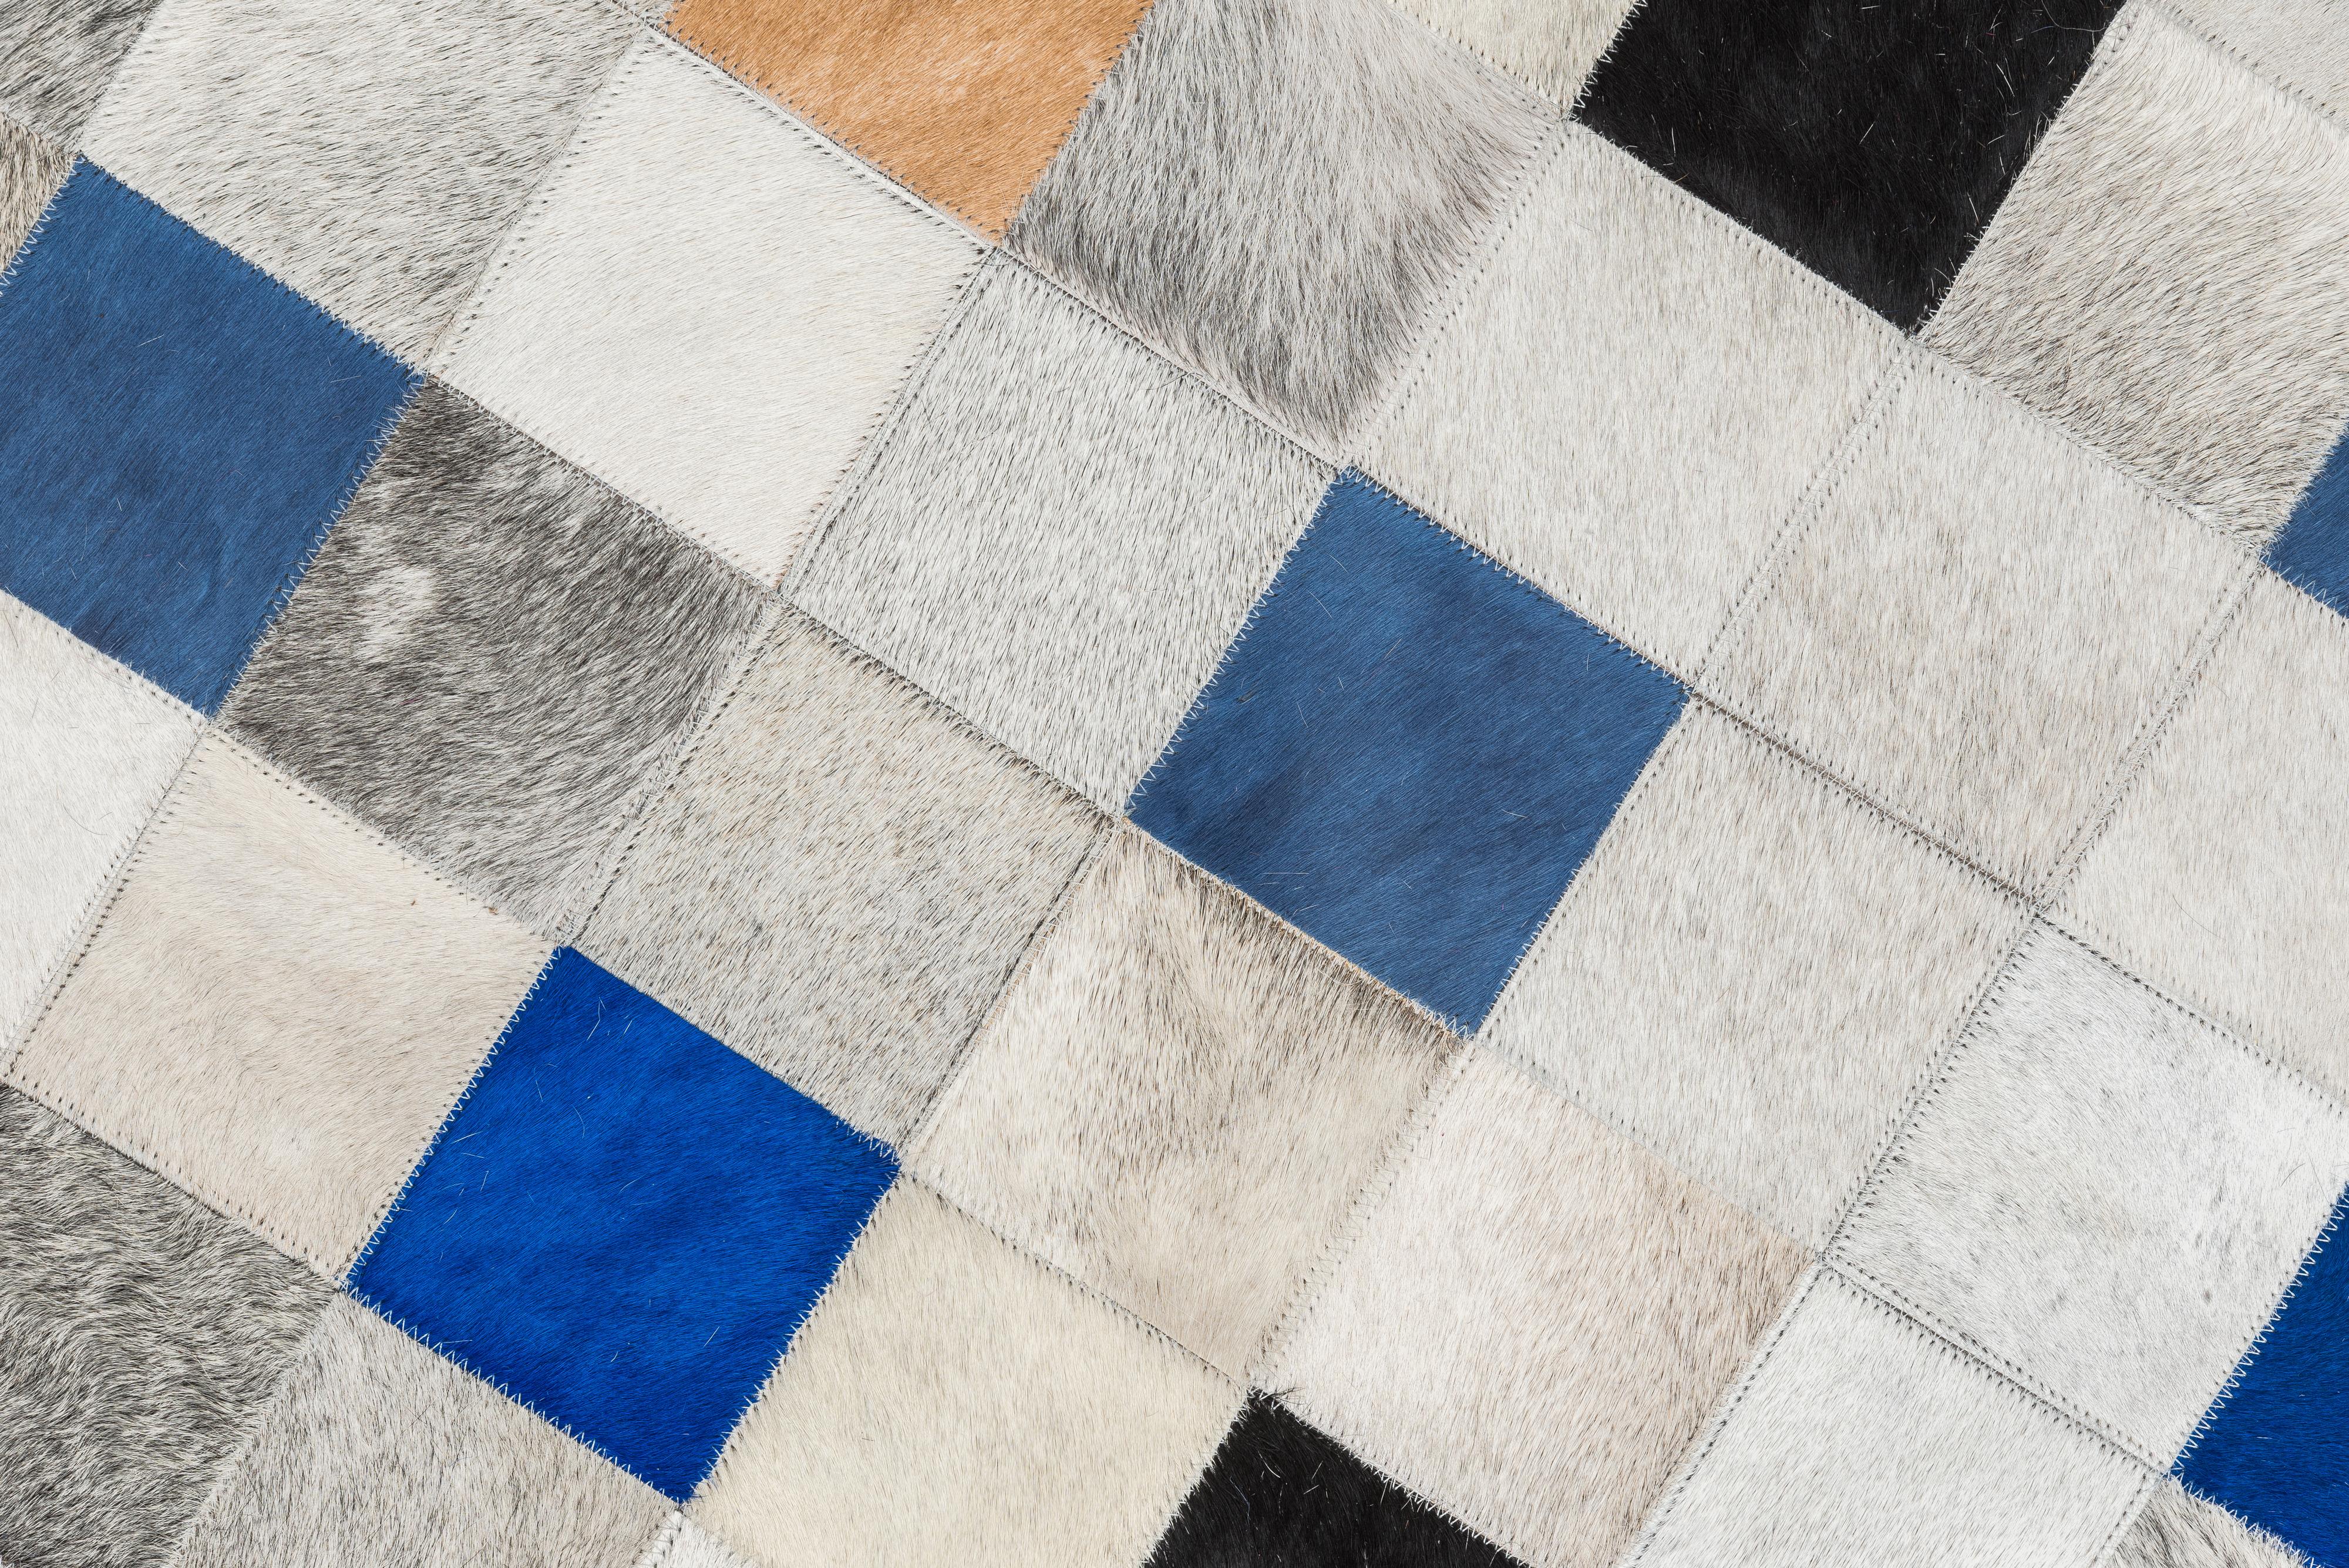 A playful, yet striking new release under our Alta line, the Falling Squares rug will add spades of charisma and sophistication to your interior. The Blue colourway is combined with natural grey shades to create a warm and rich texture on your